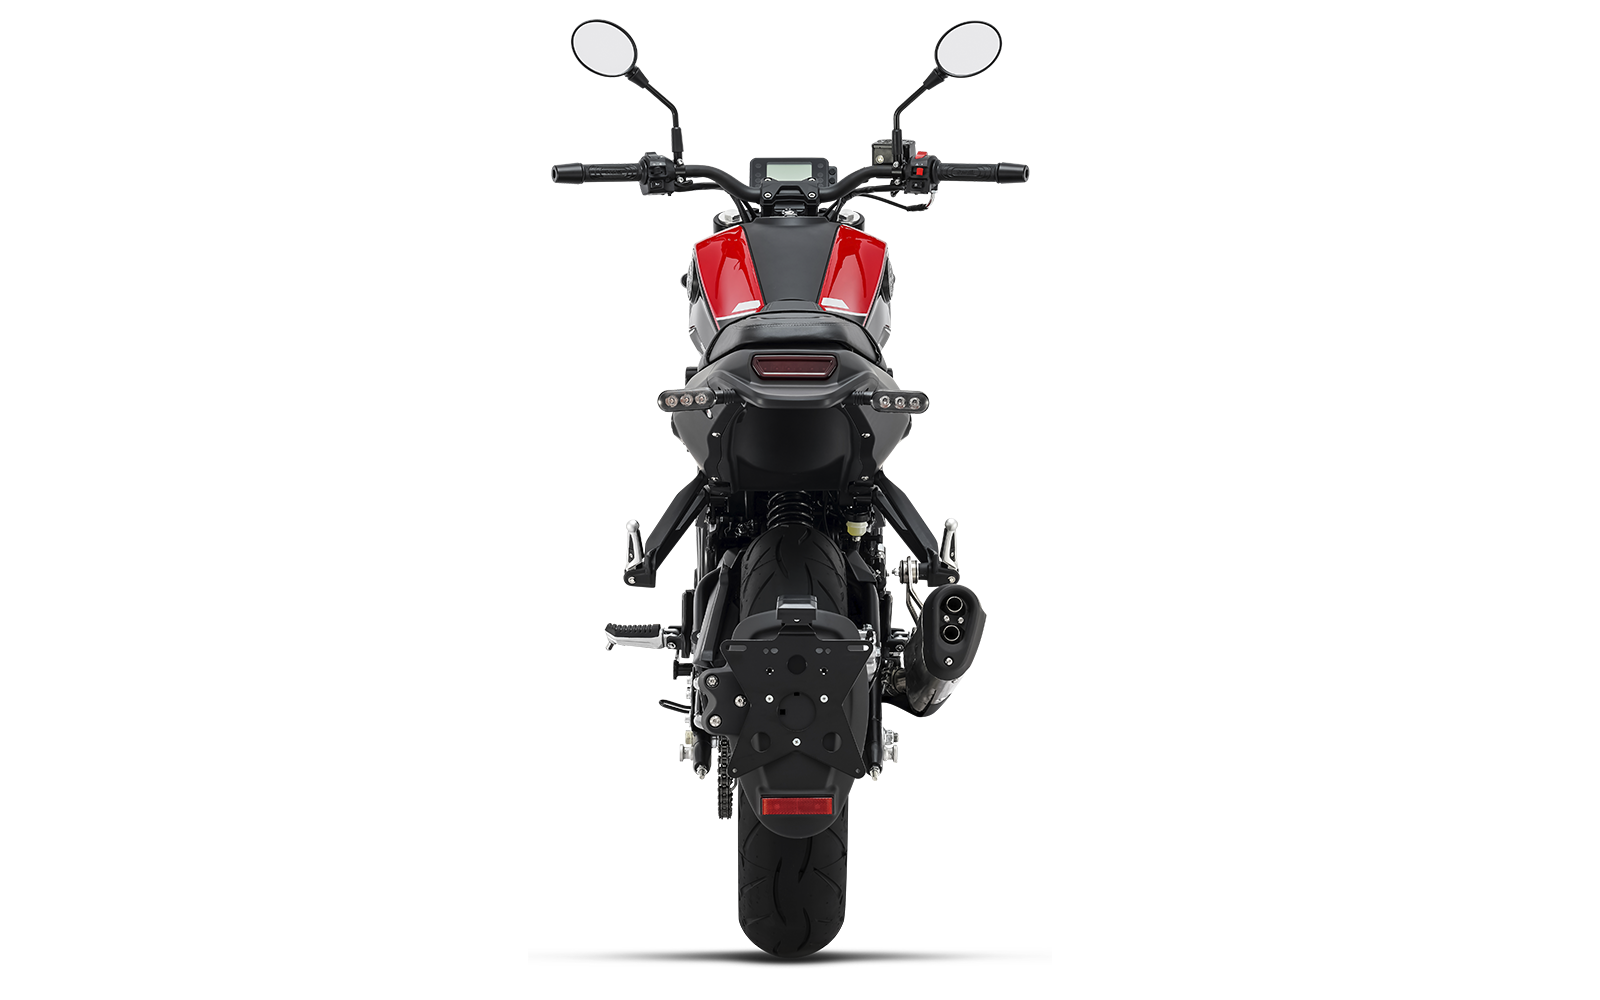 Leoncino 250 E5 - Benelli Q.J. | Motorcycles and scooters